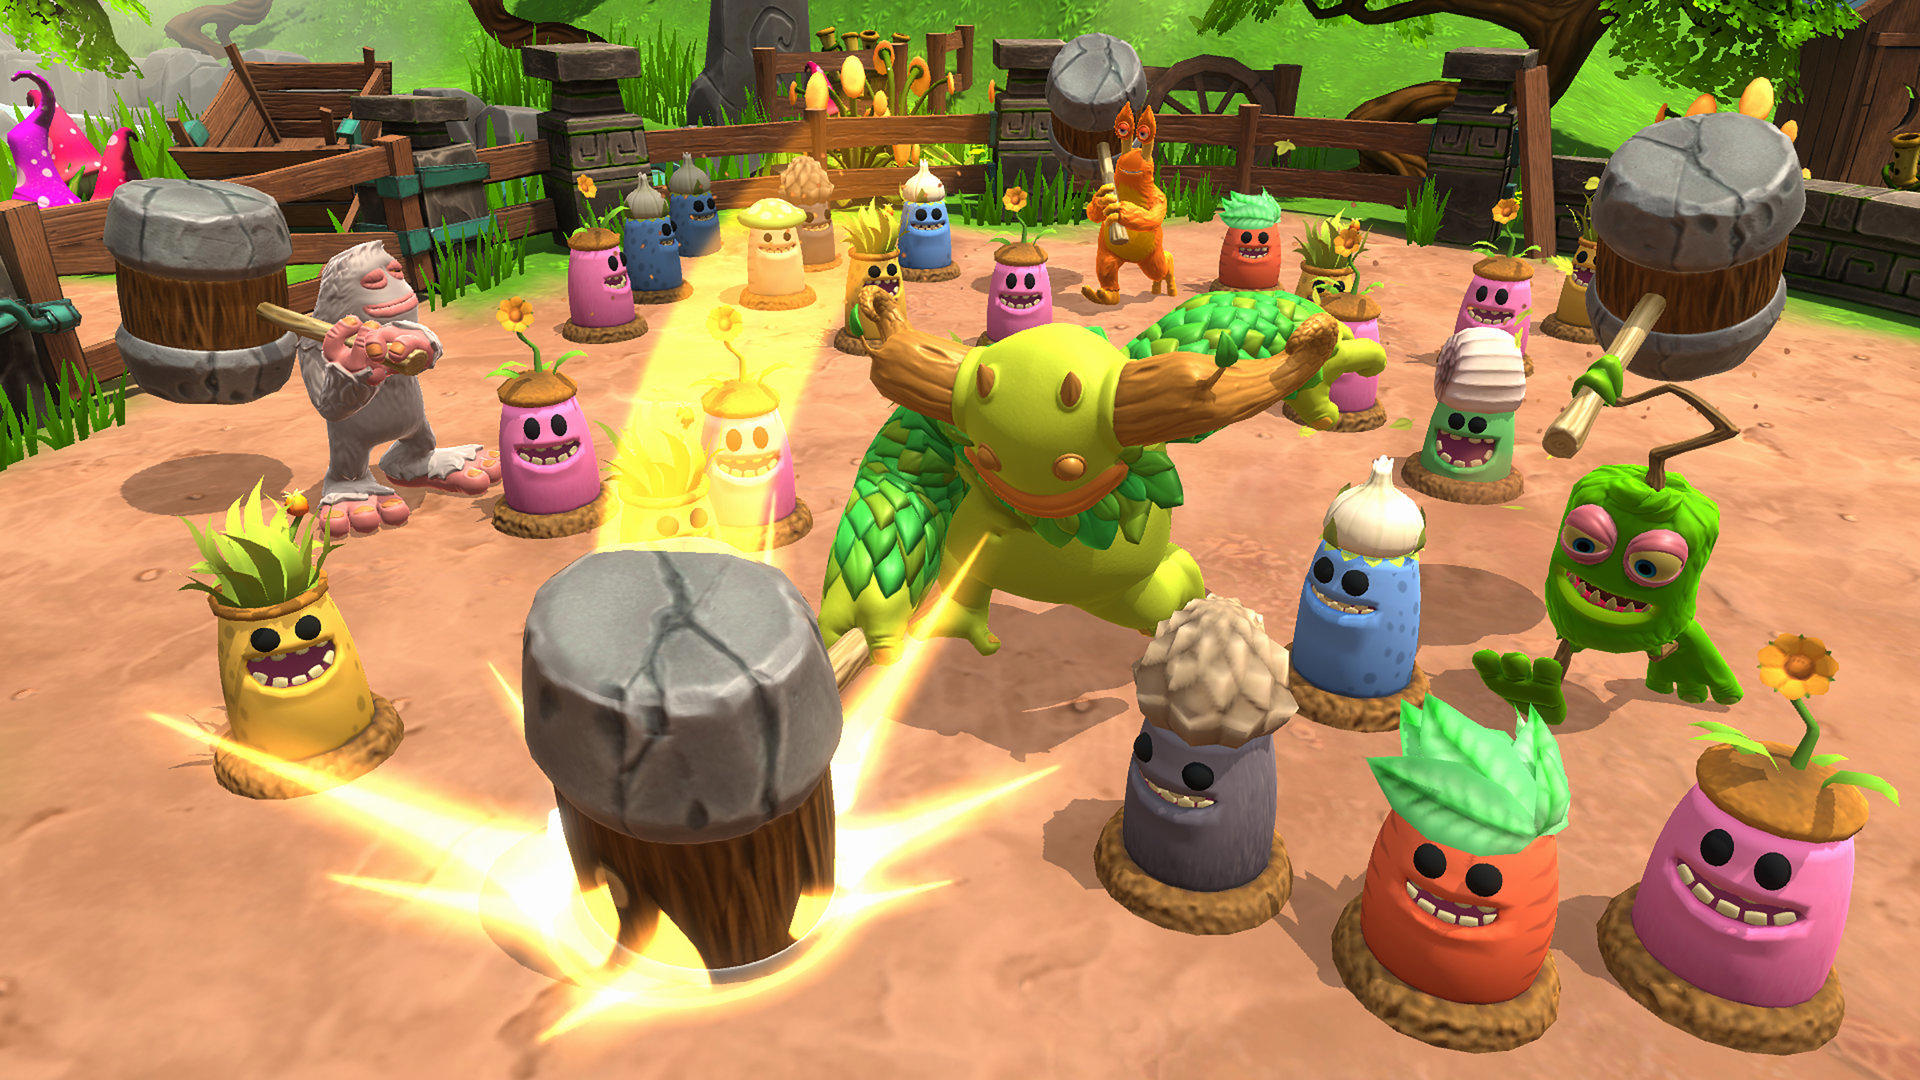 my singing monsters playground ps4